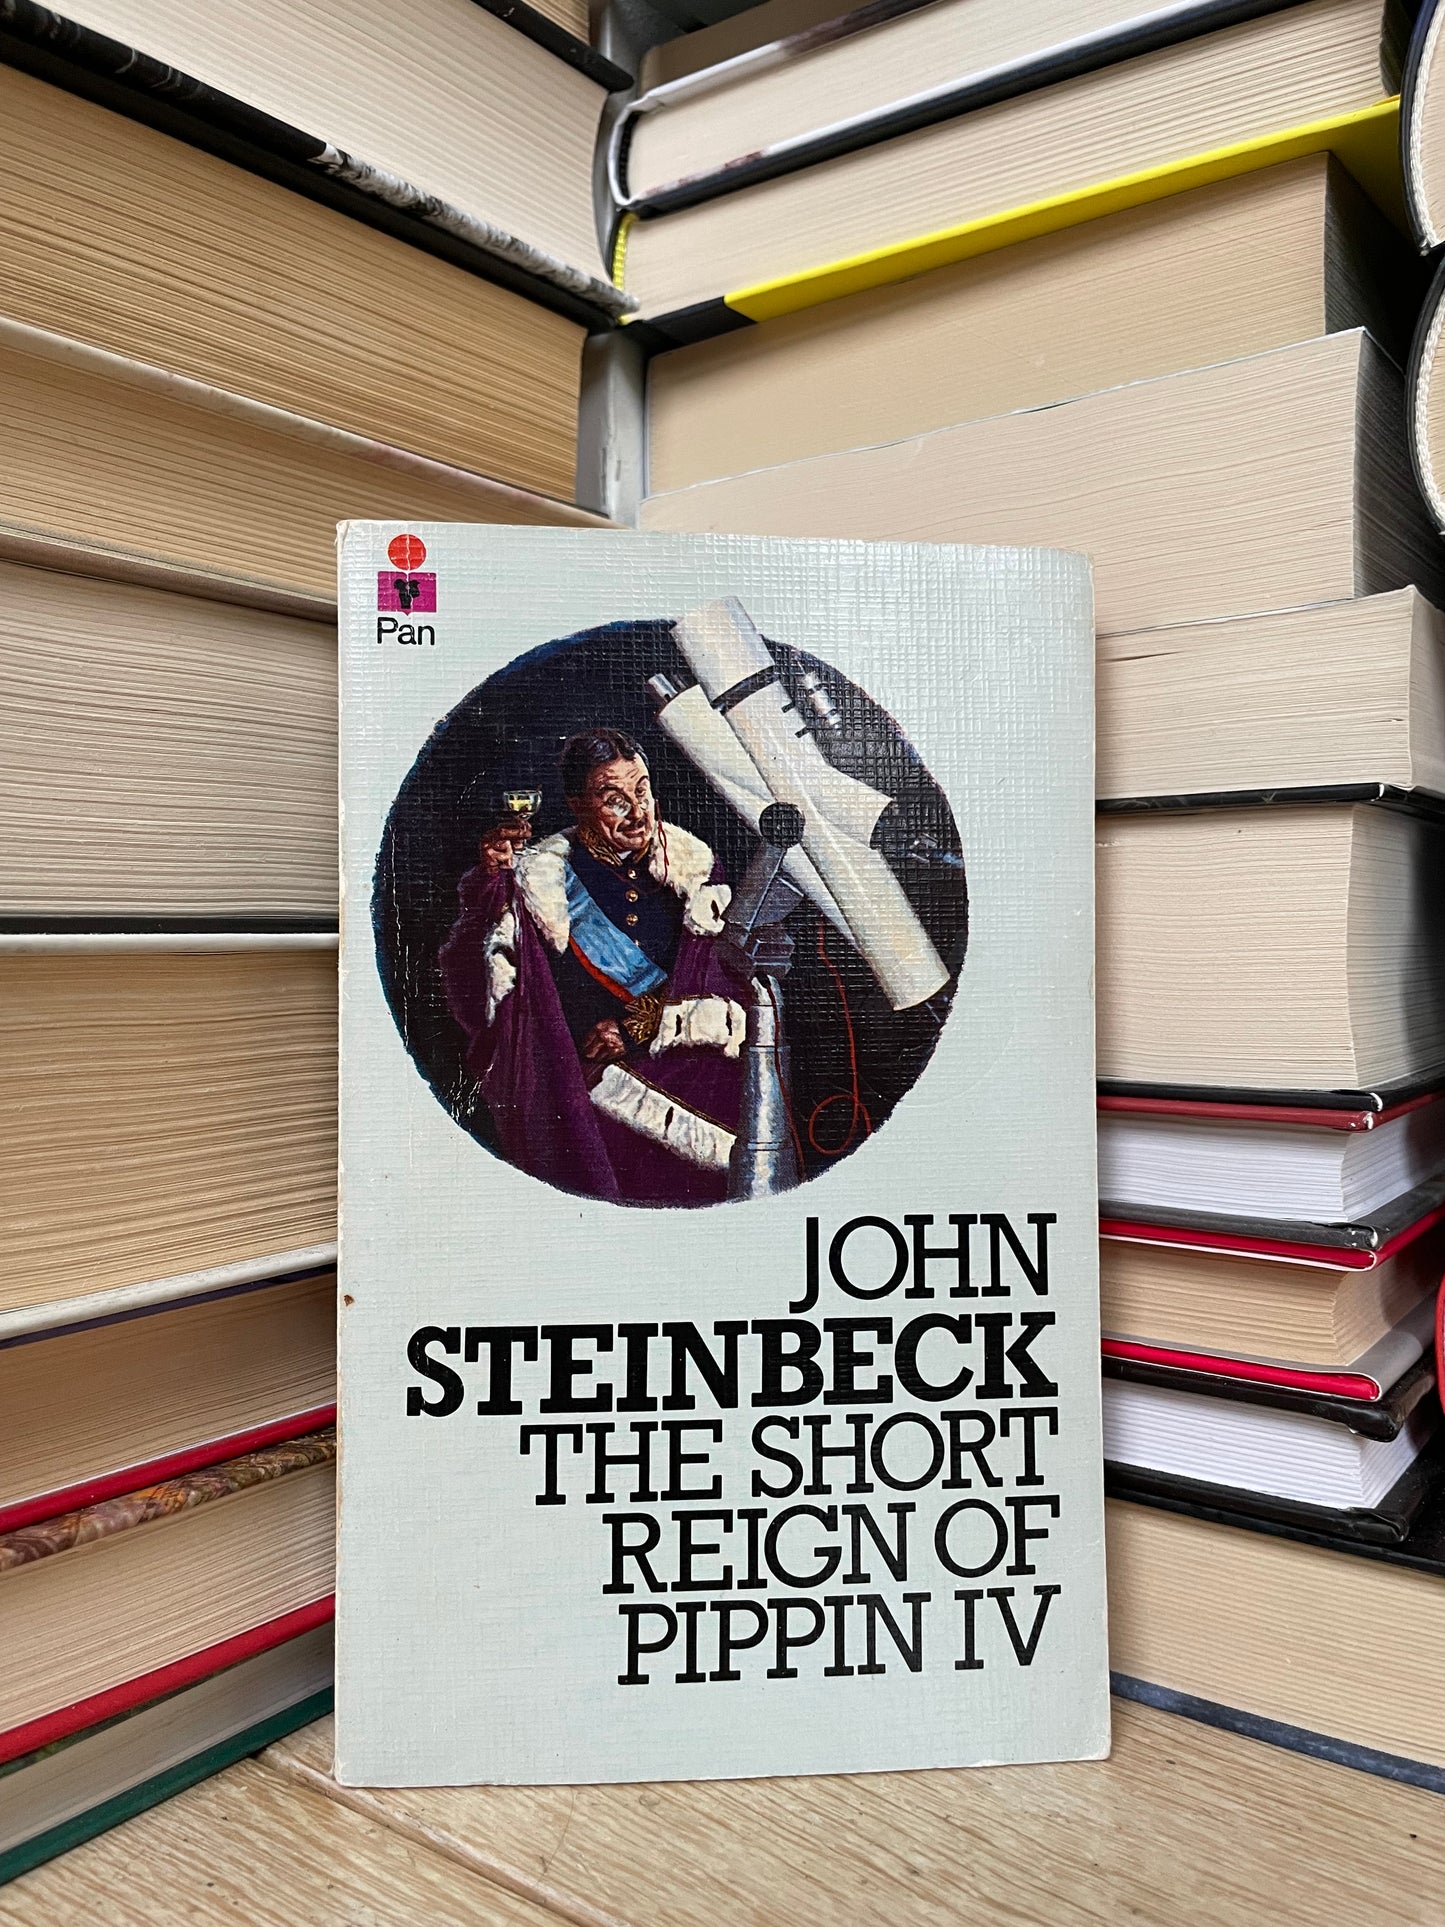 John Steinbeck - The Short Reign of Pippin IV